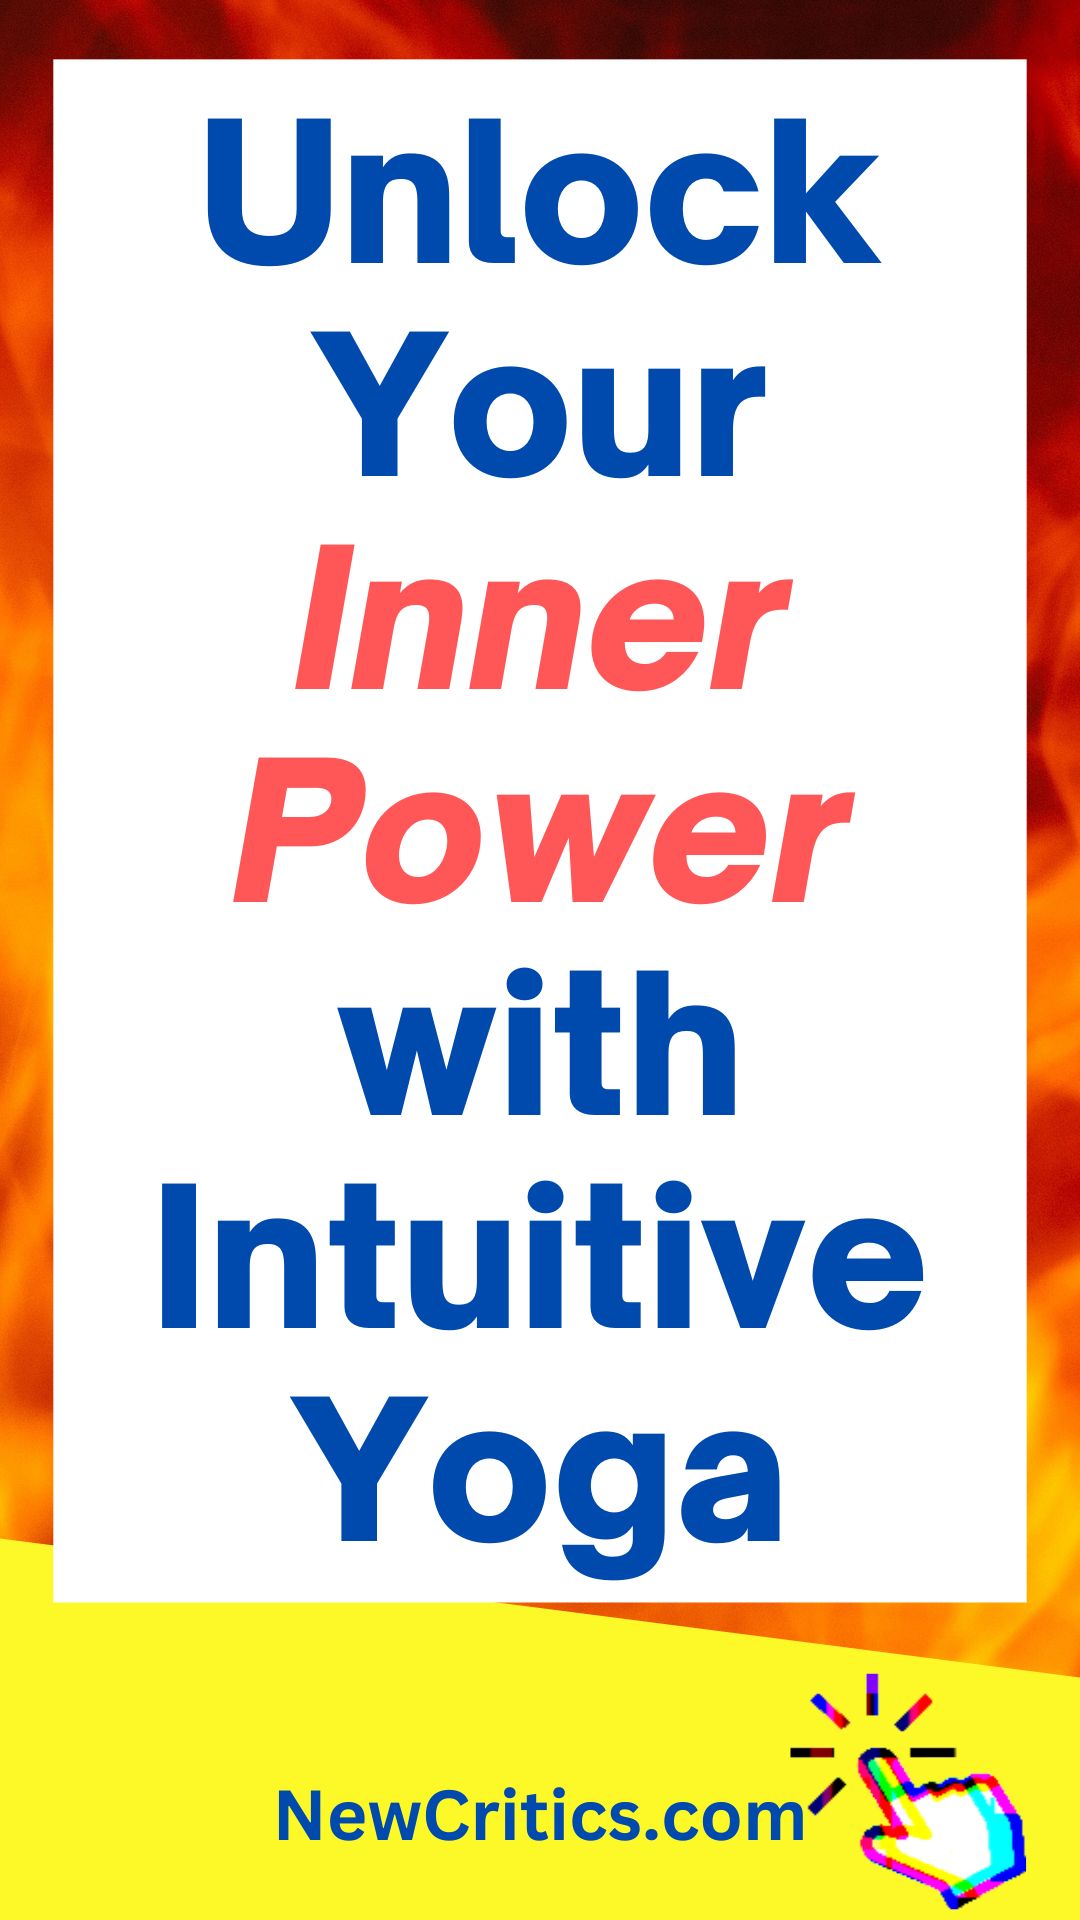 Unlock Your Inner Power with Intuitive Yoga / Canva